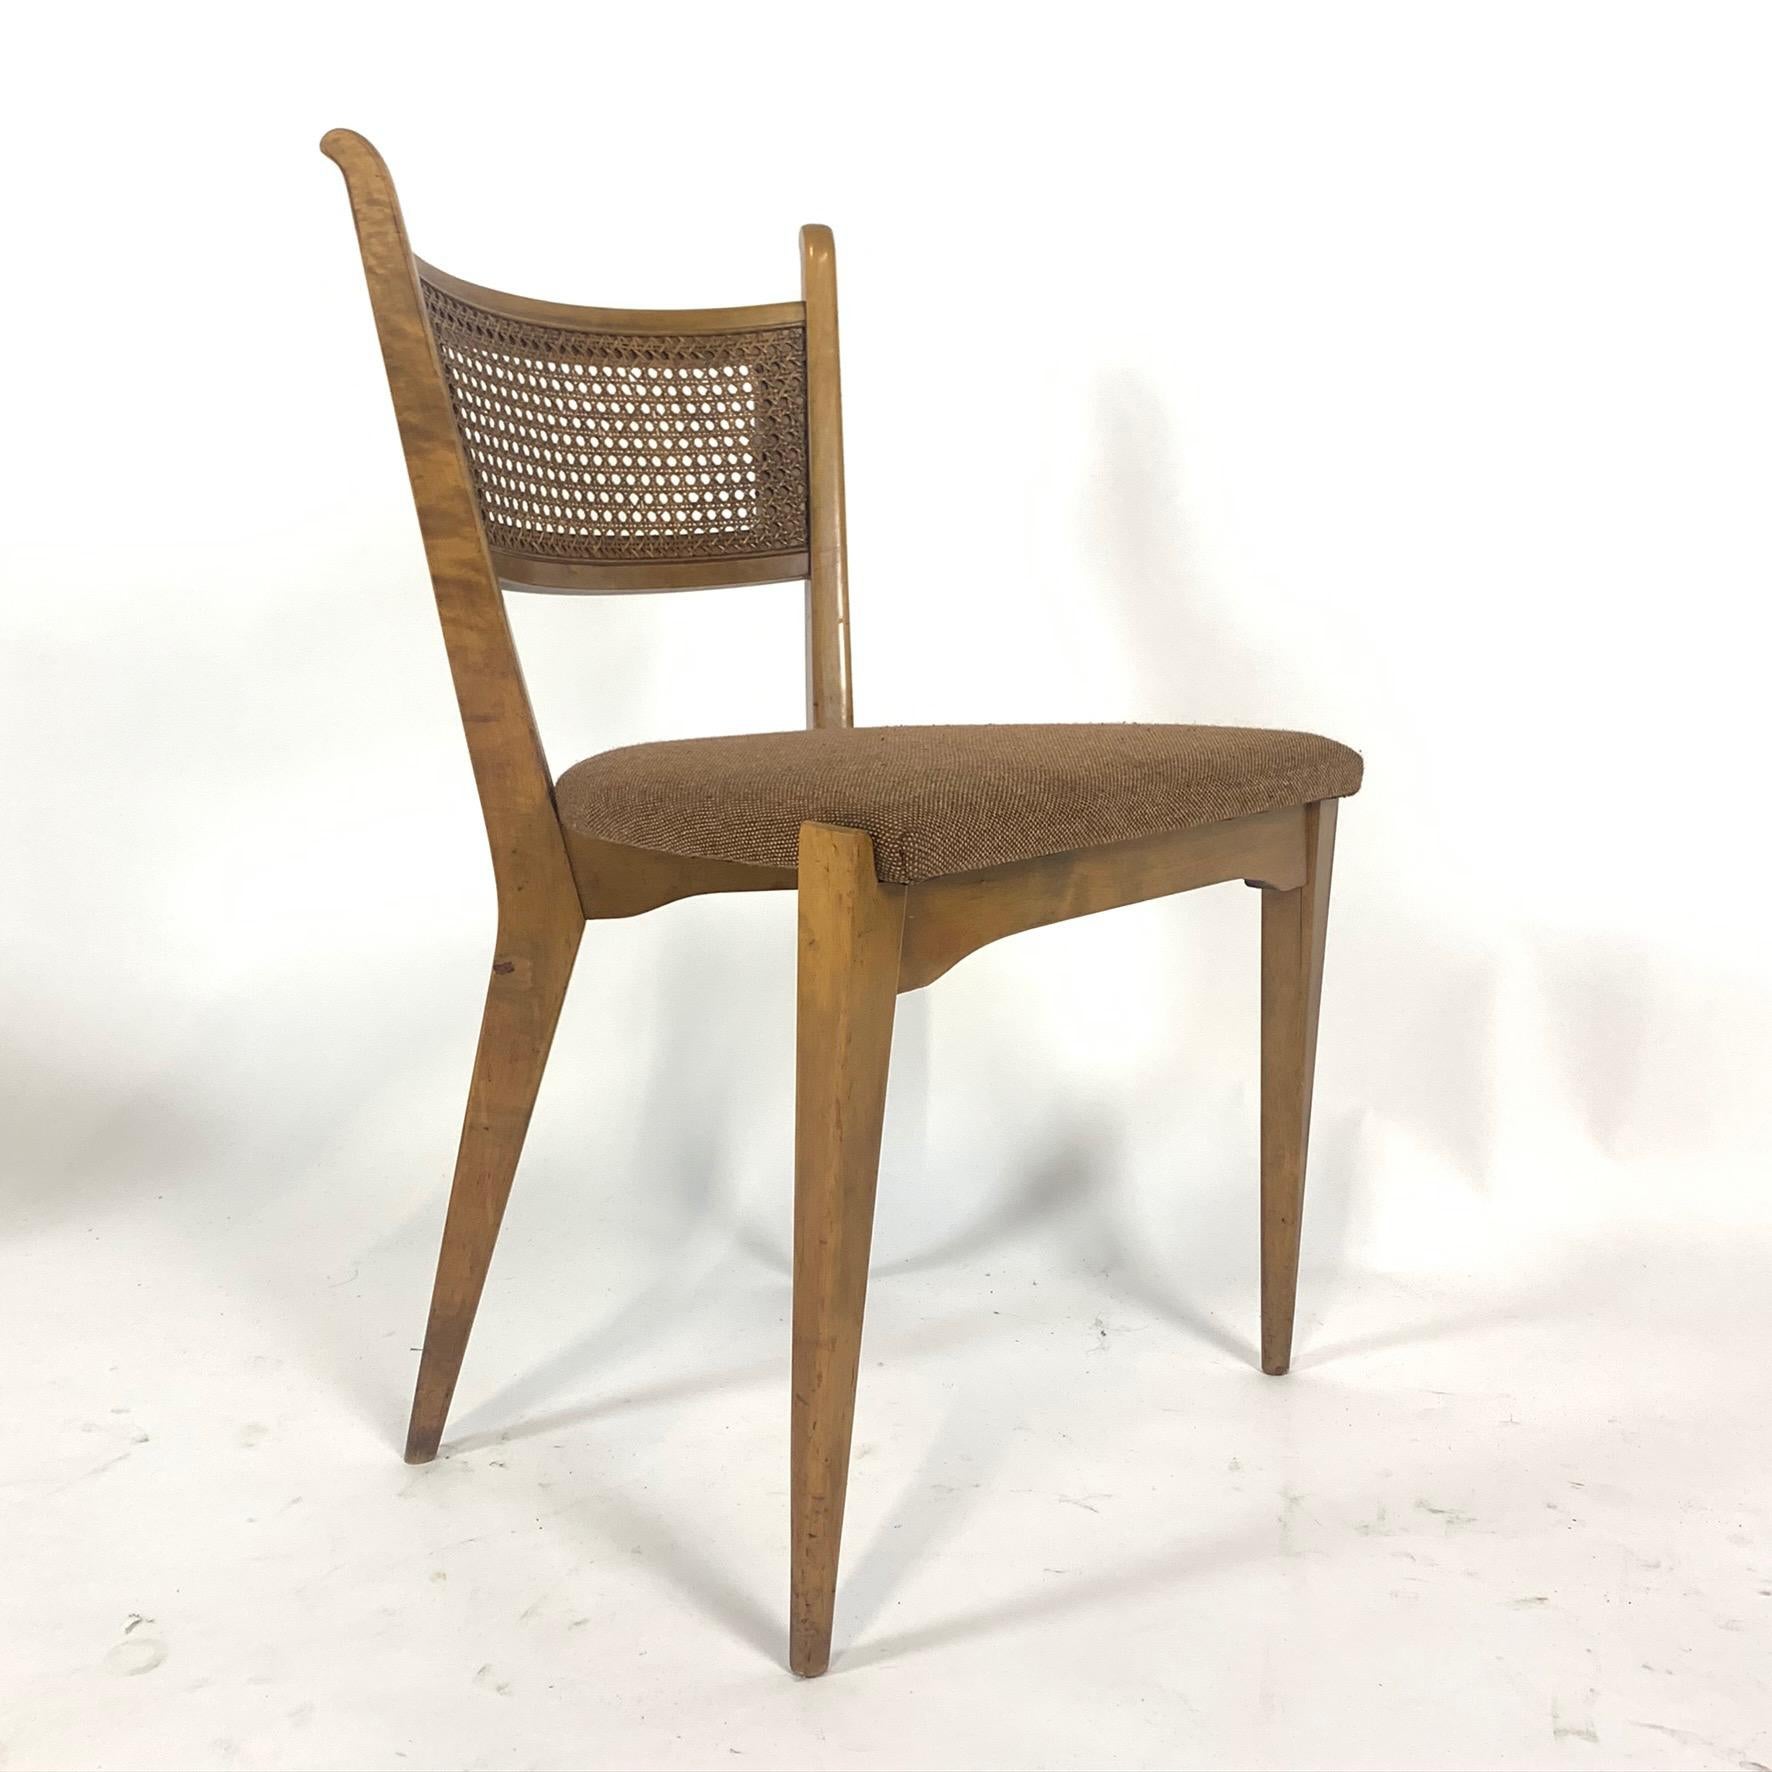 Rare Set of 6 Swedish Modern Cane Back Sculptural Dining Chairs by Edmond Spence 1